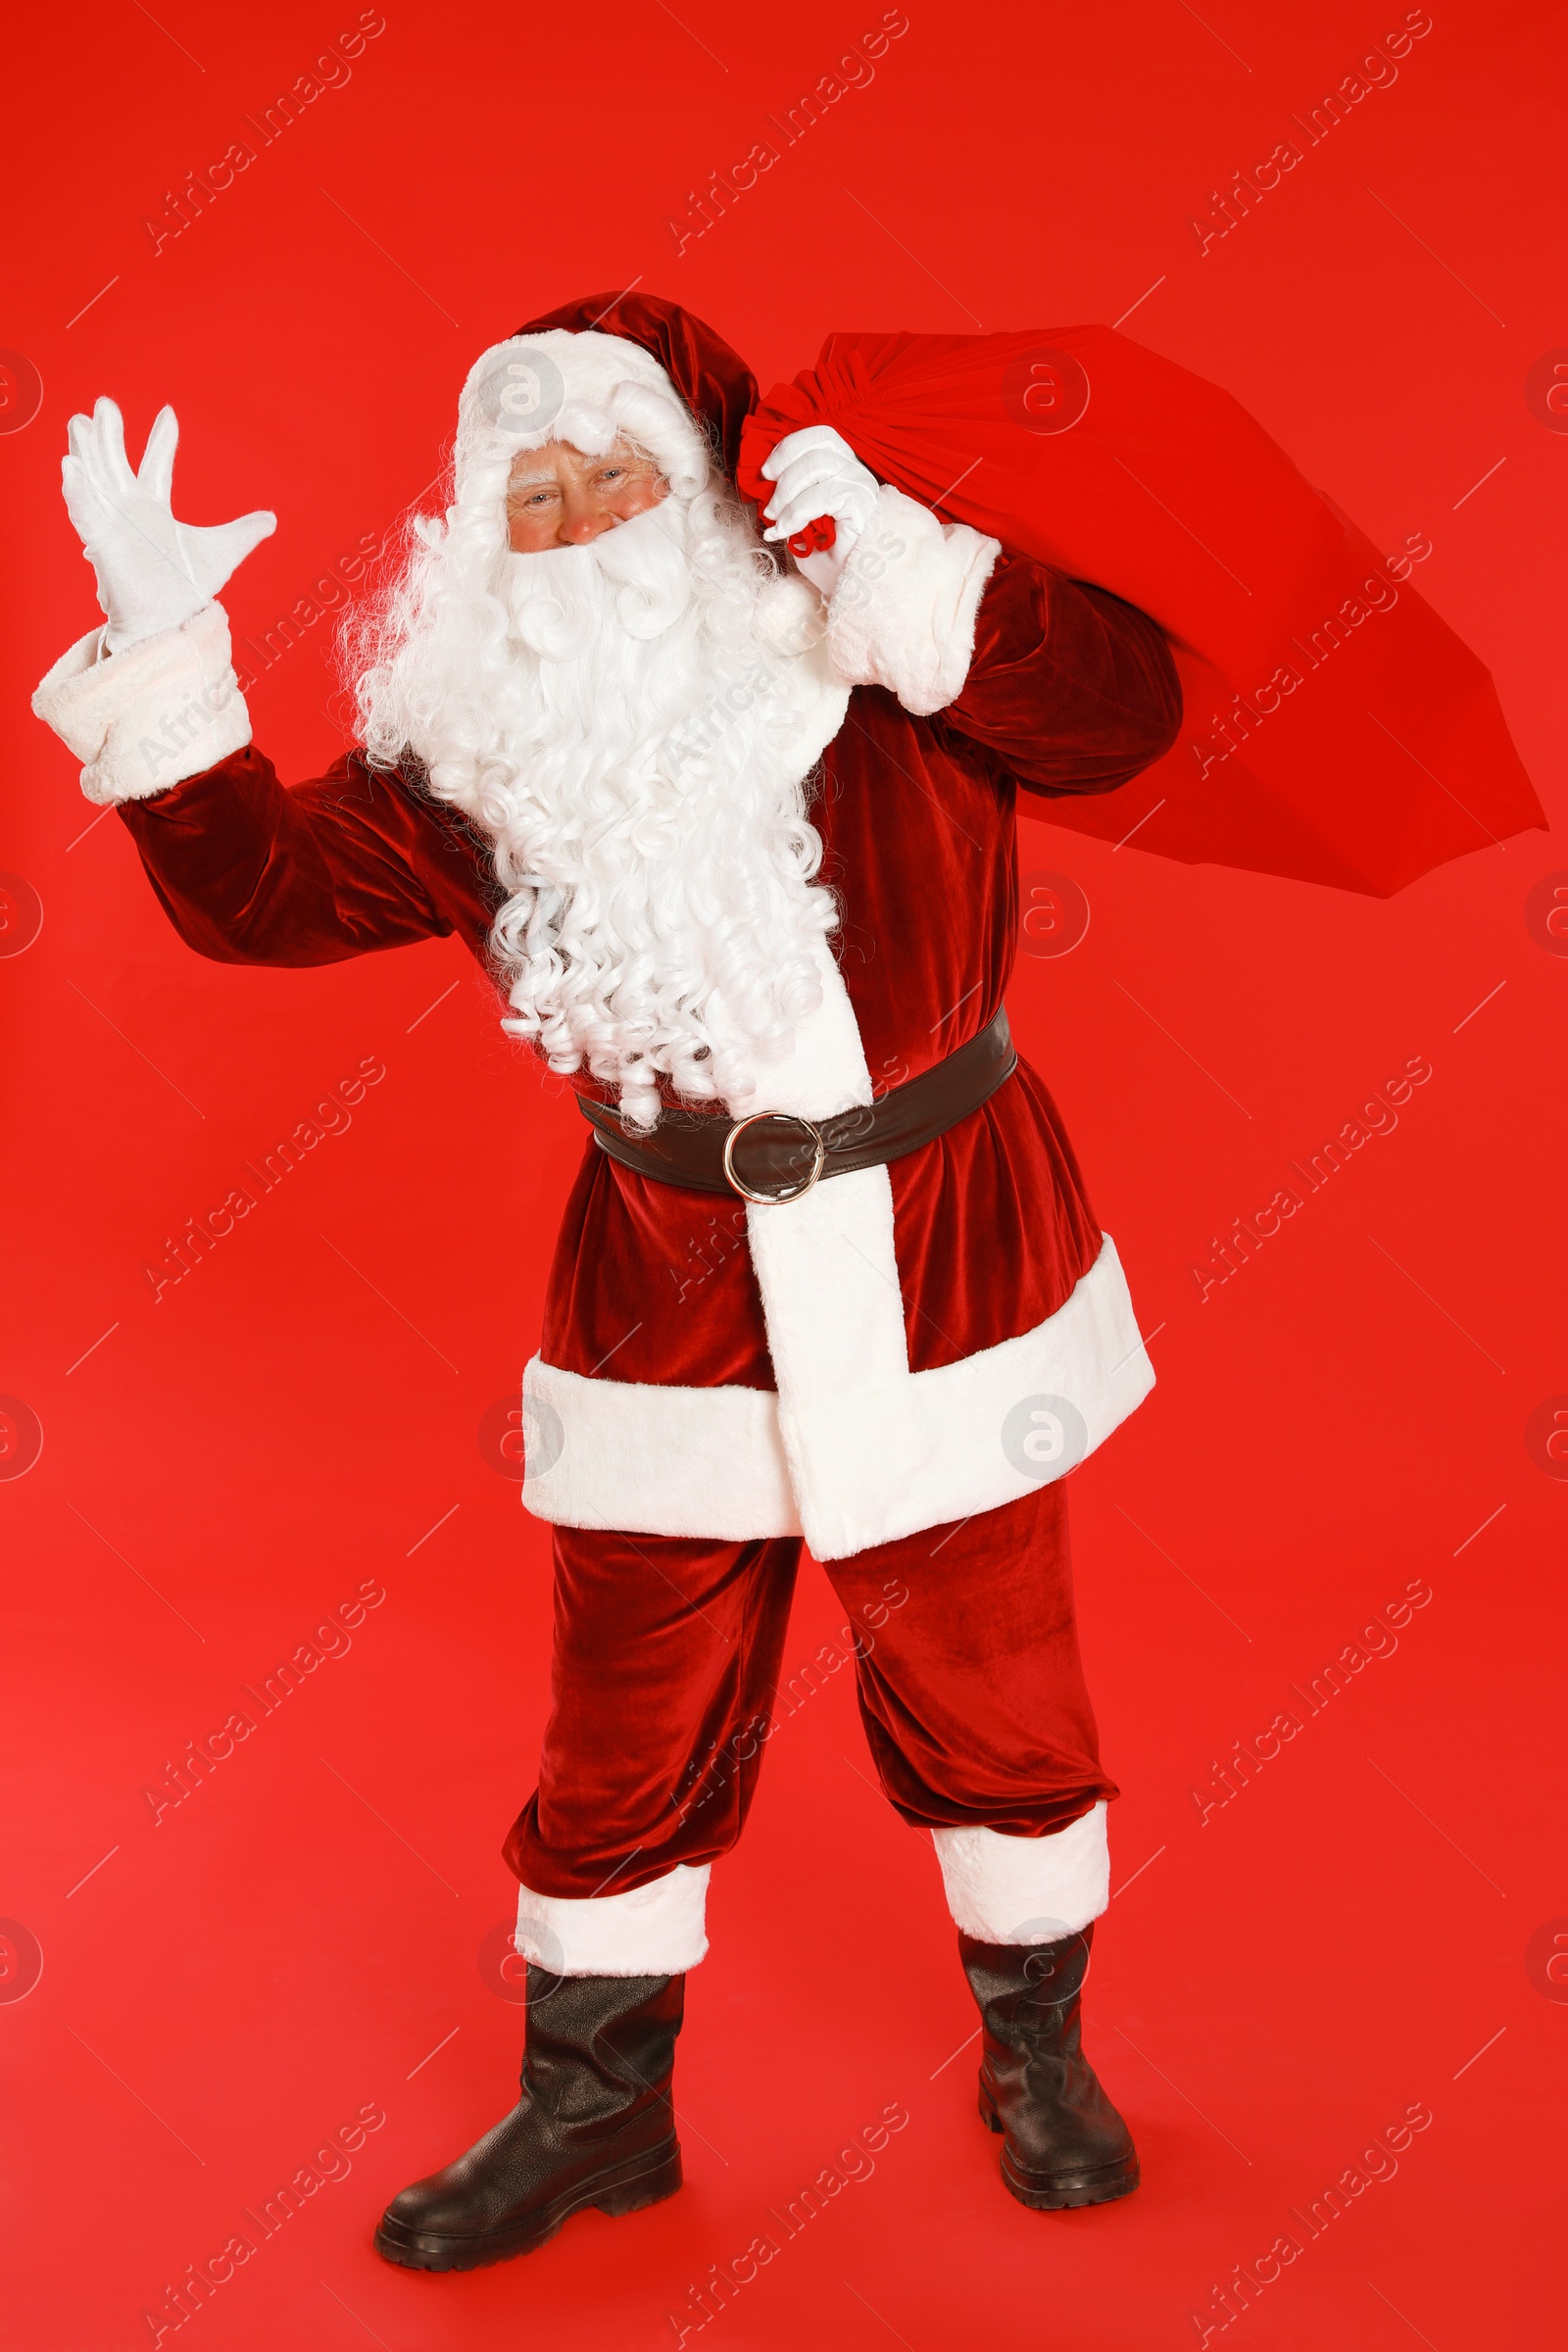 Photo of Authentic Santa Claus with bag full of gifts on red background